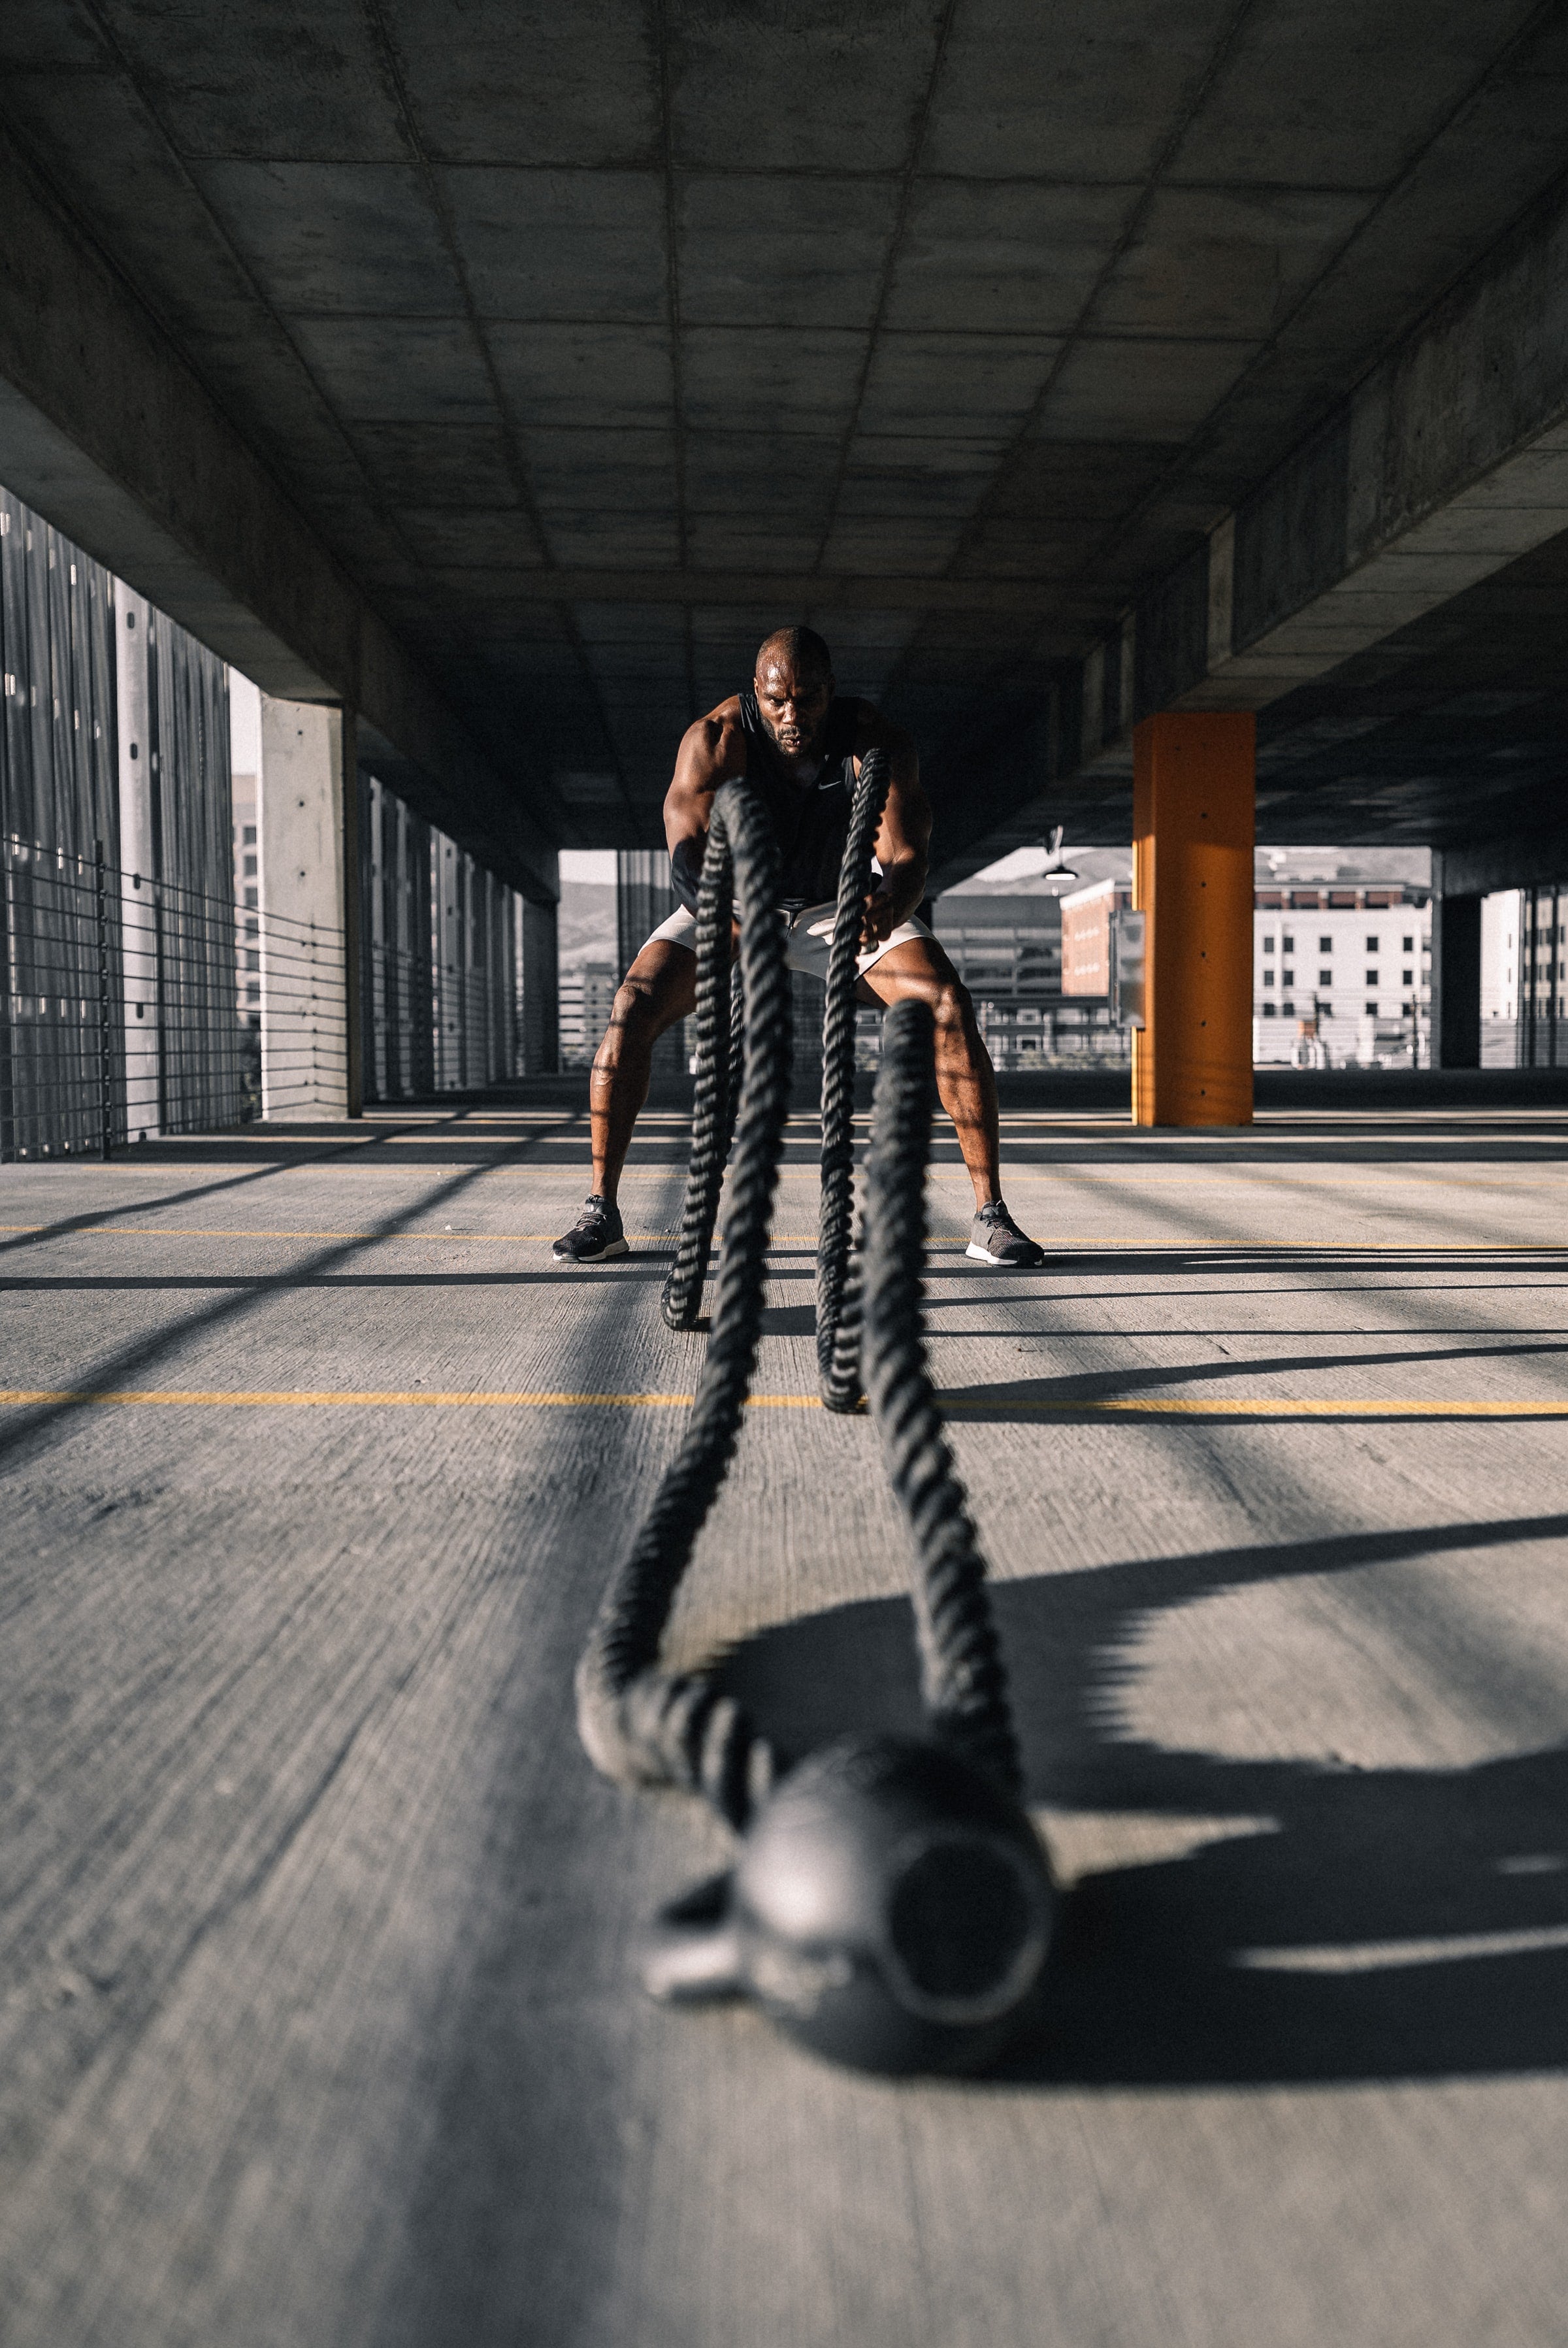 5 Things You Need to Know About Battle Ropes